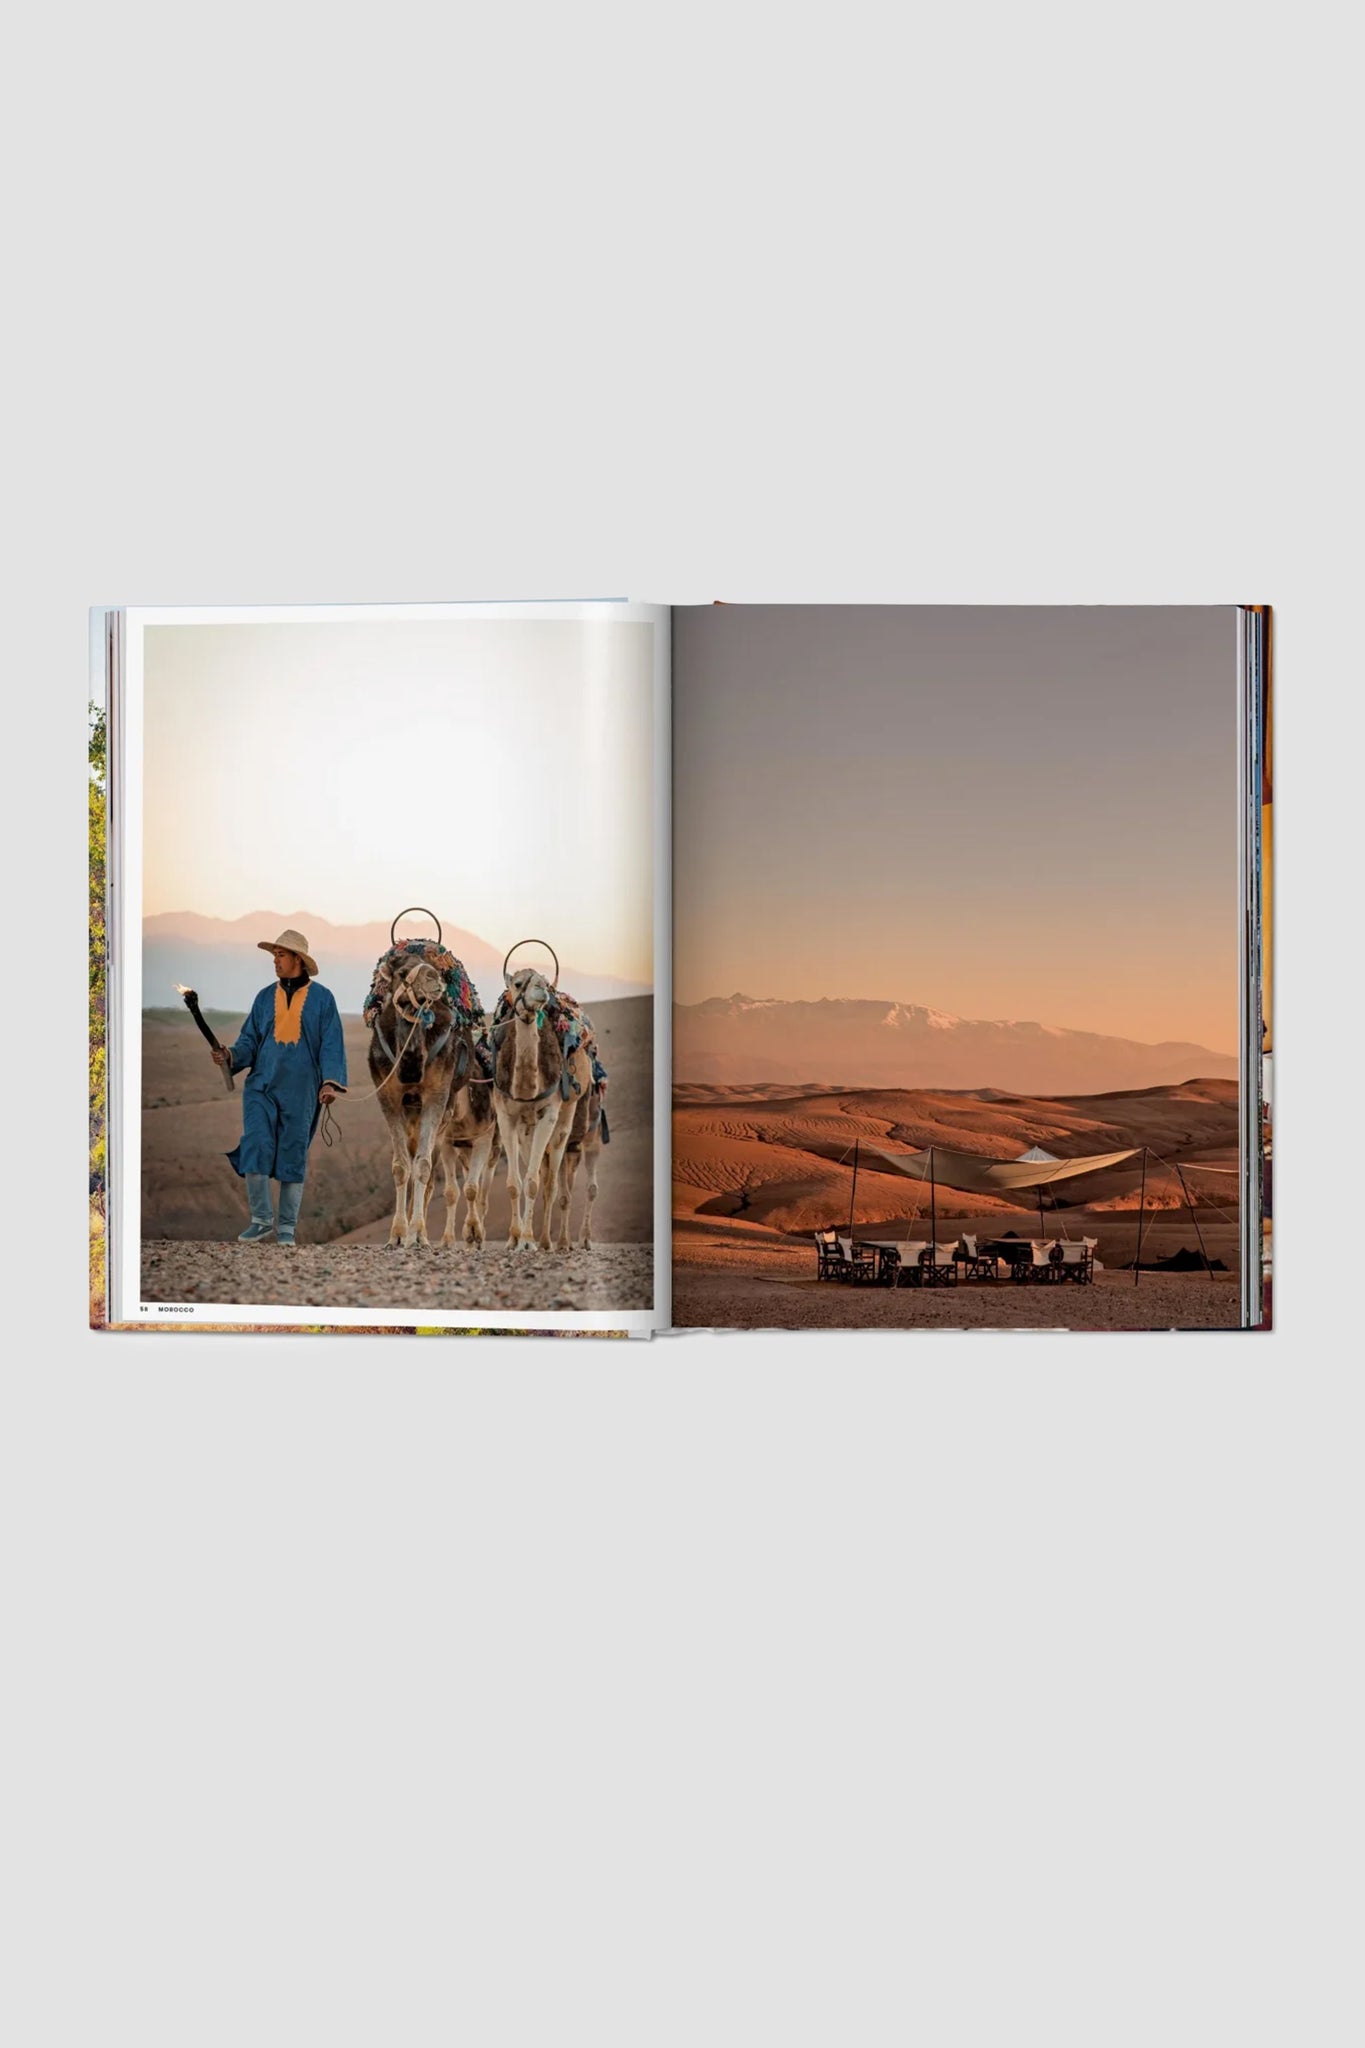 Taschen Great Escapes Africa. The Hotel Book